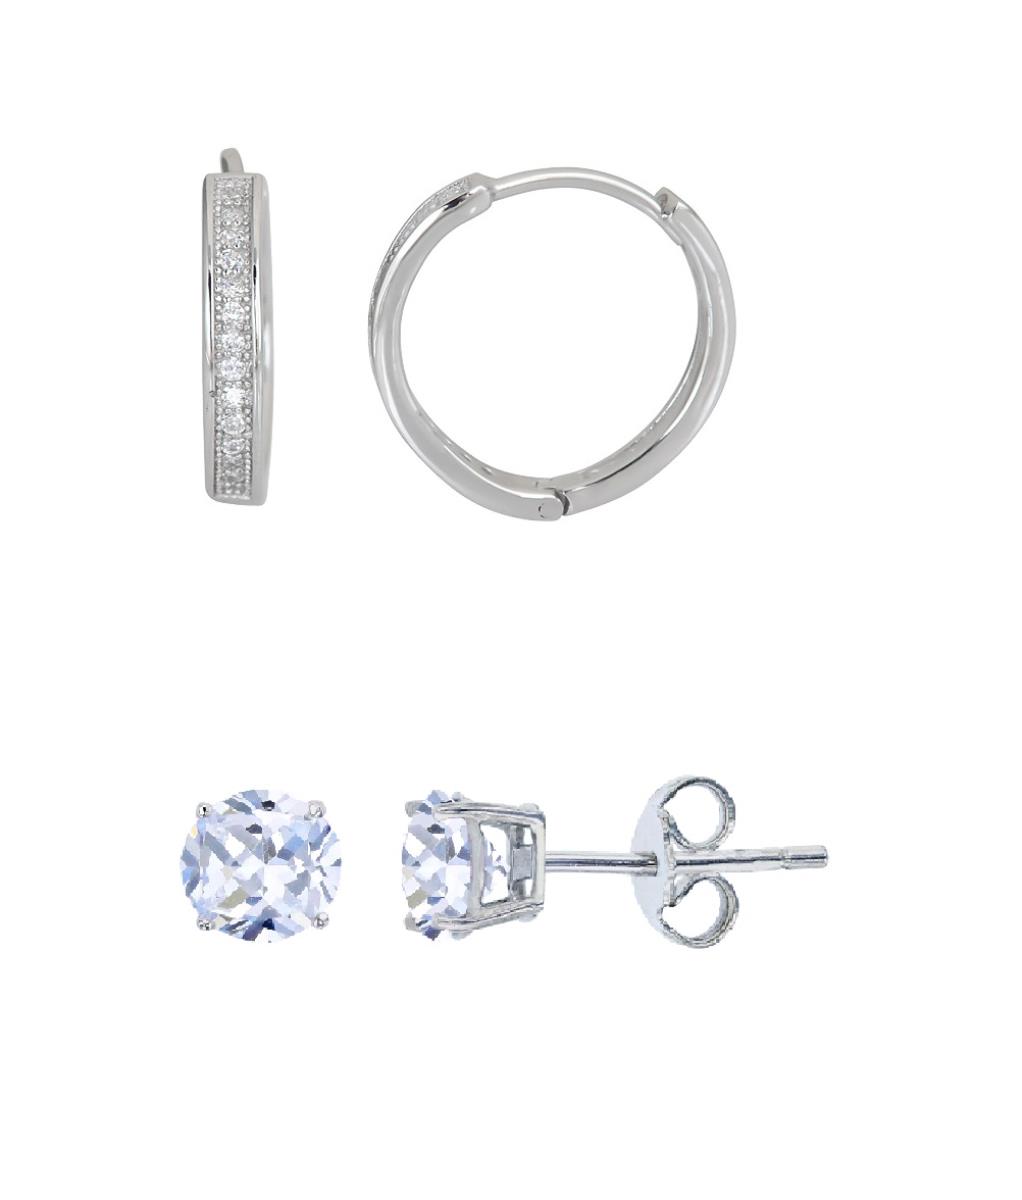 Sterling Silver Micropave Huggies & 8.00mm AAA Round Solitaire Stud Earring Set